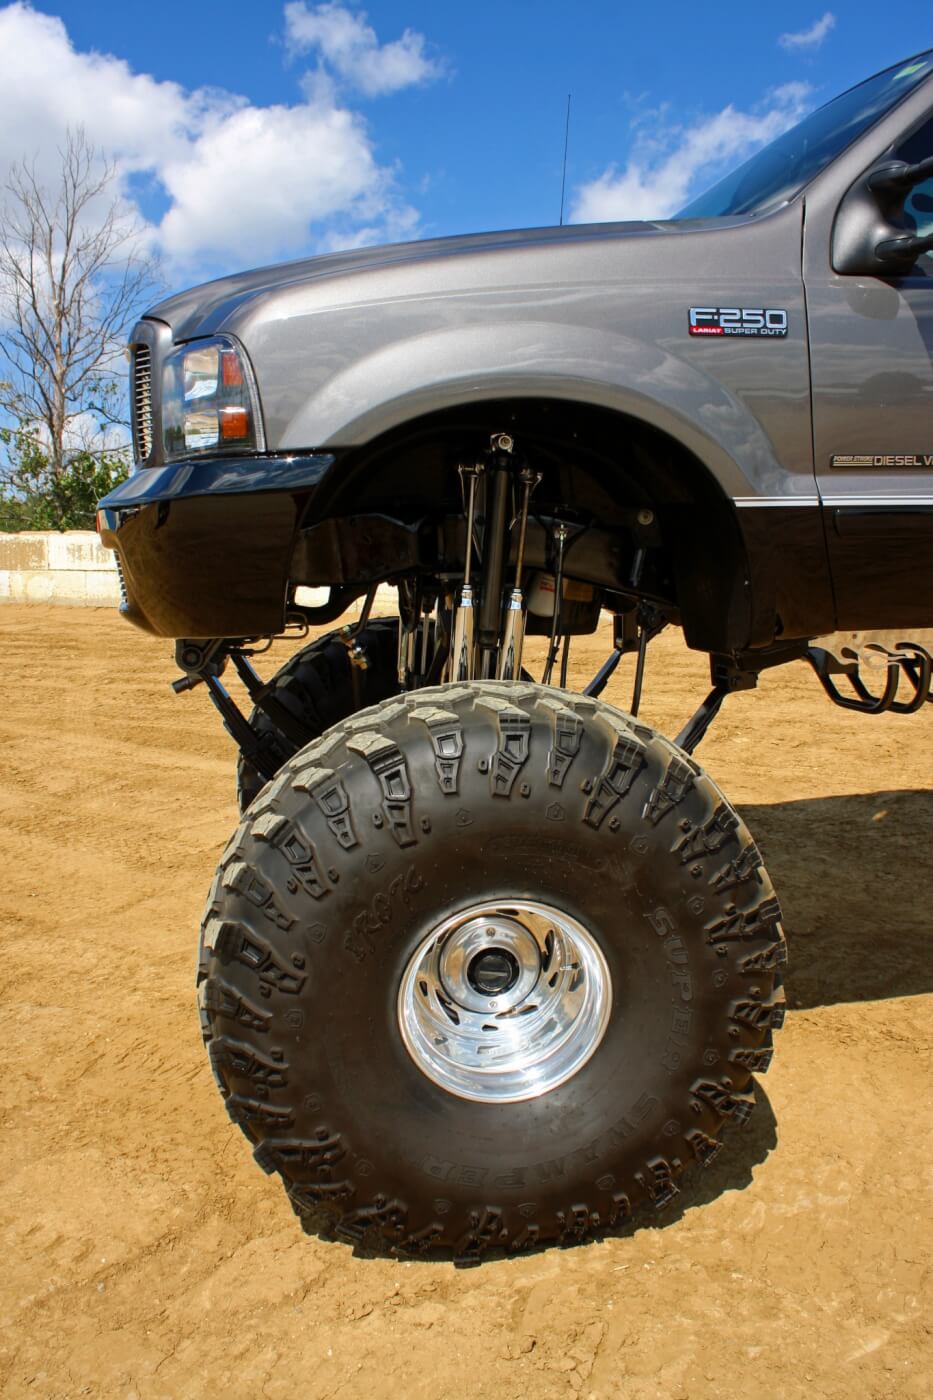 The massive IROK tires make the 16.5X14-inch Weld wheels look small.